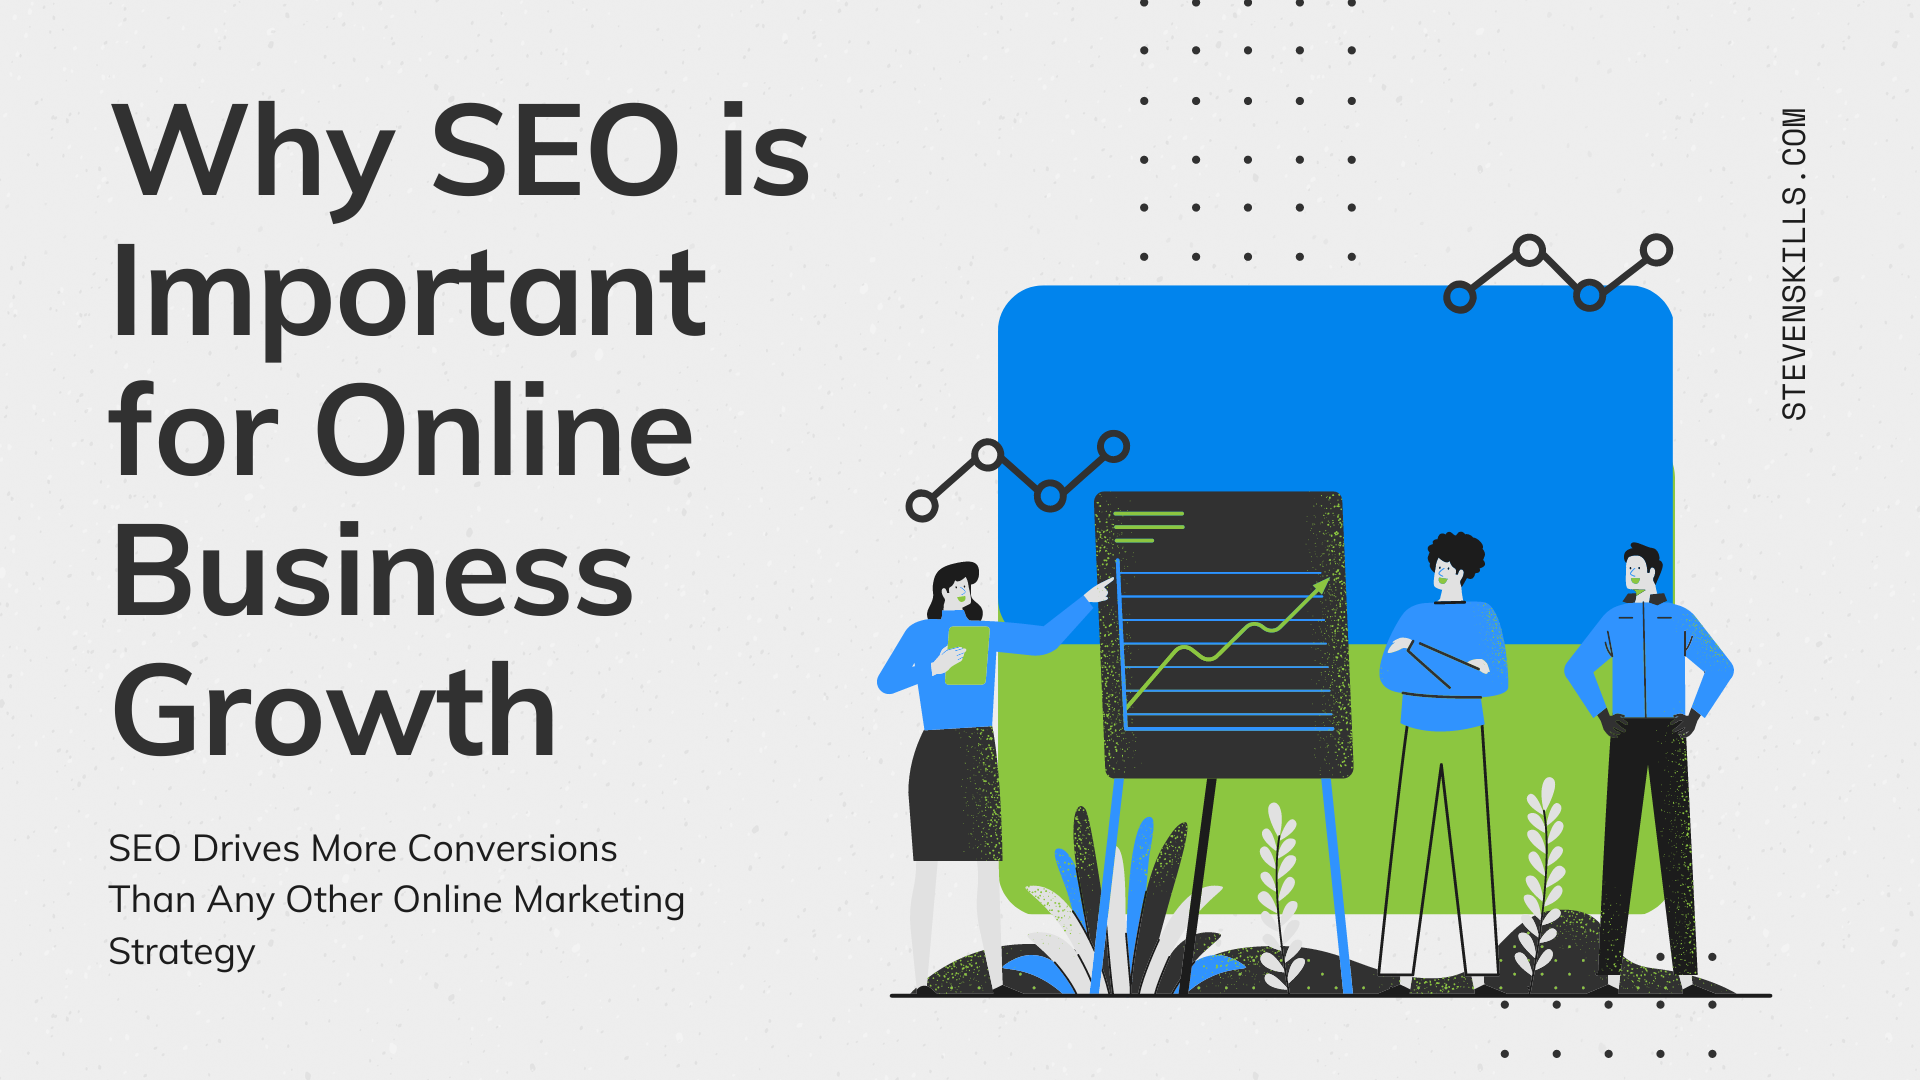 Why SEO is Important for Online Business Growth